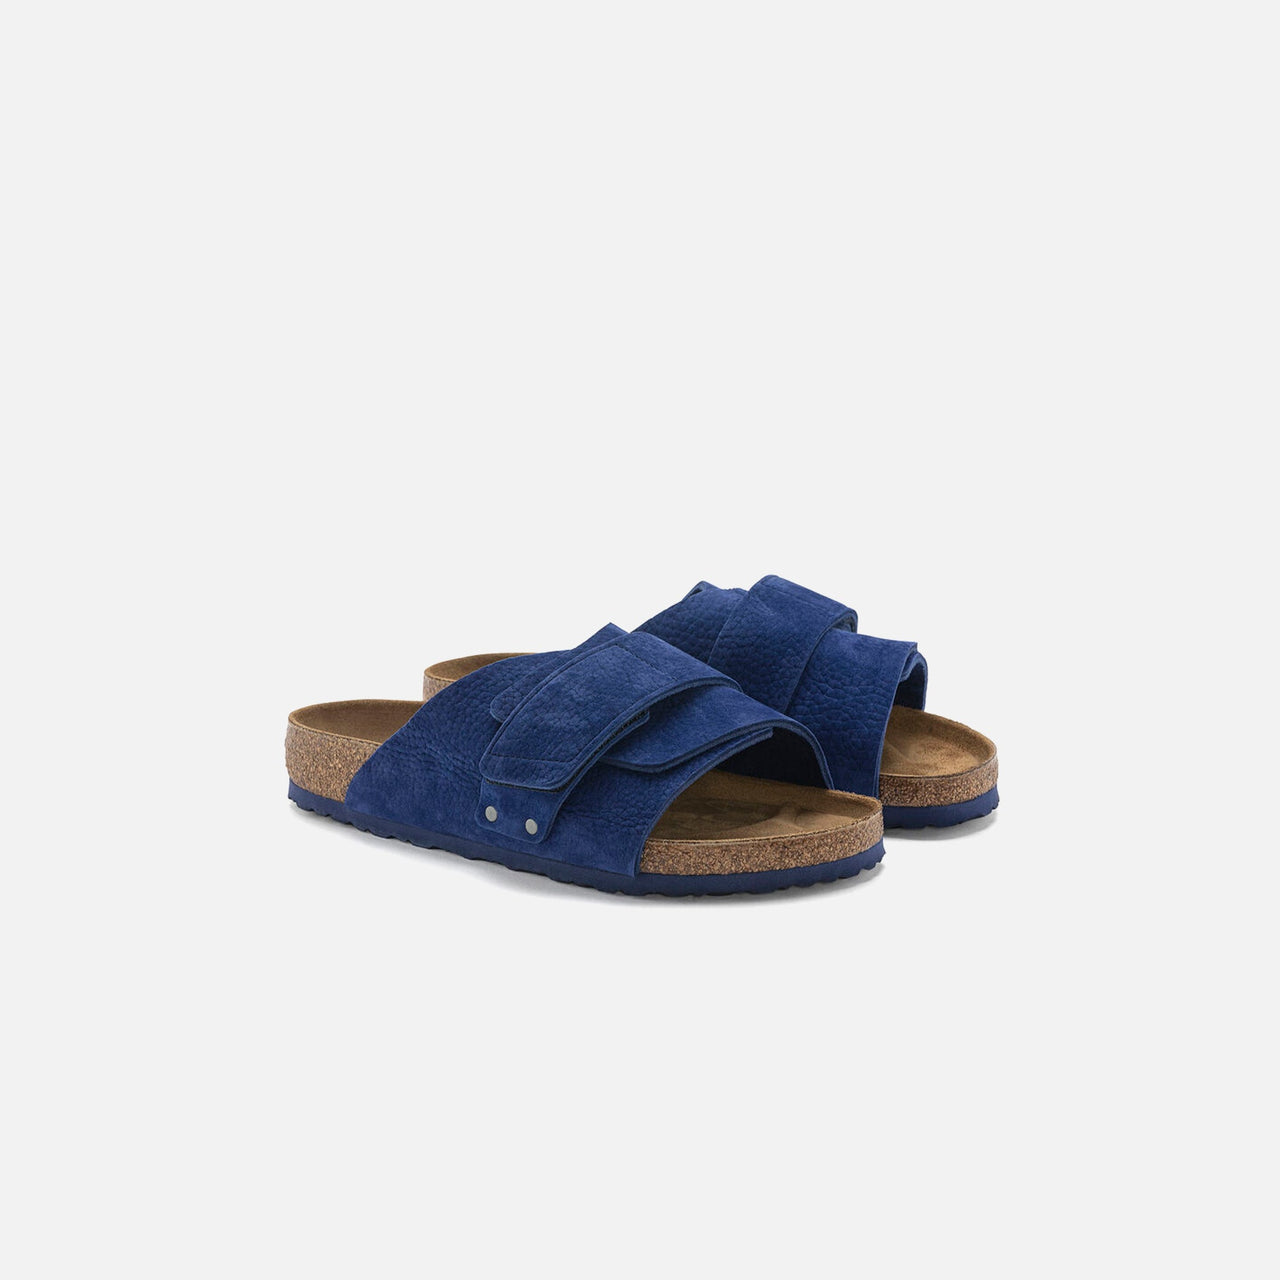 Close up of Birkenstock Kyoto Suede Ultra Blue sandal with soft suede material